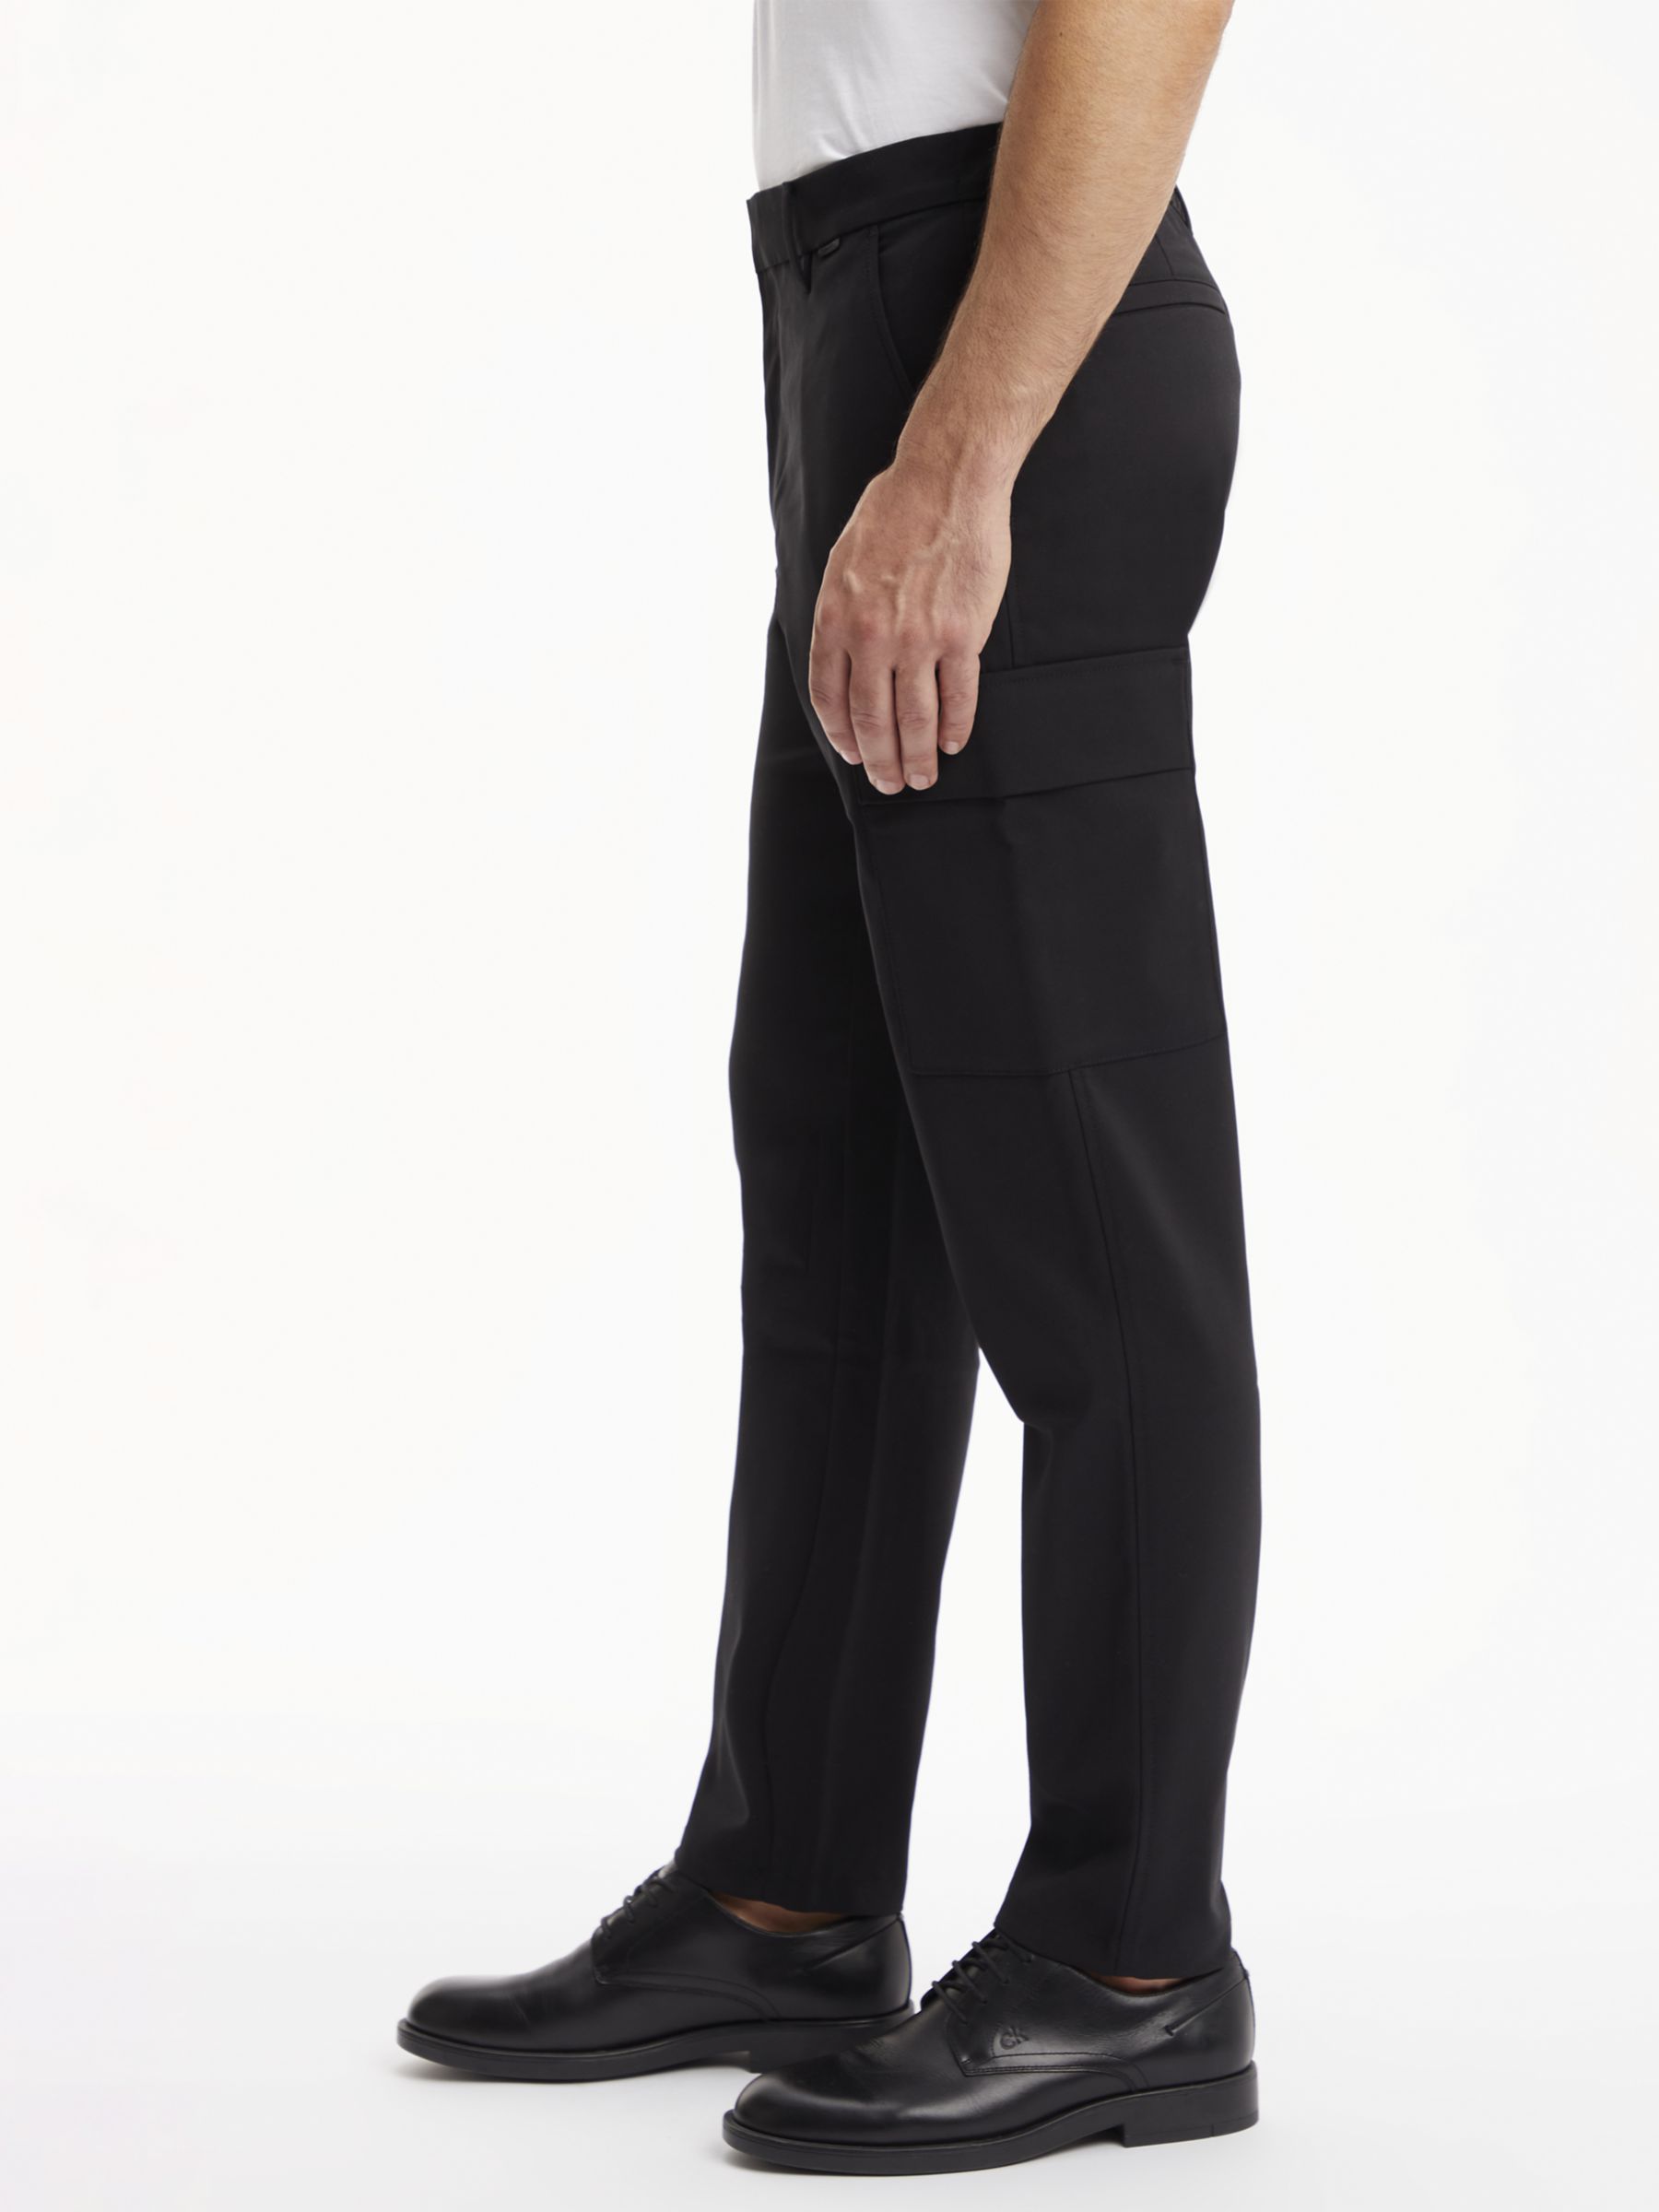 Calvin Klein Tapered Cargo Trousers, CK Black, L